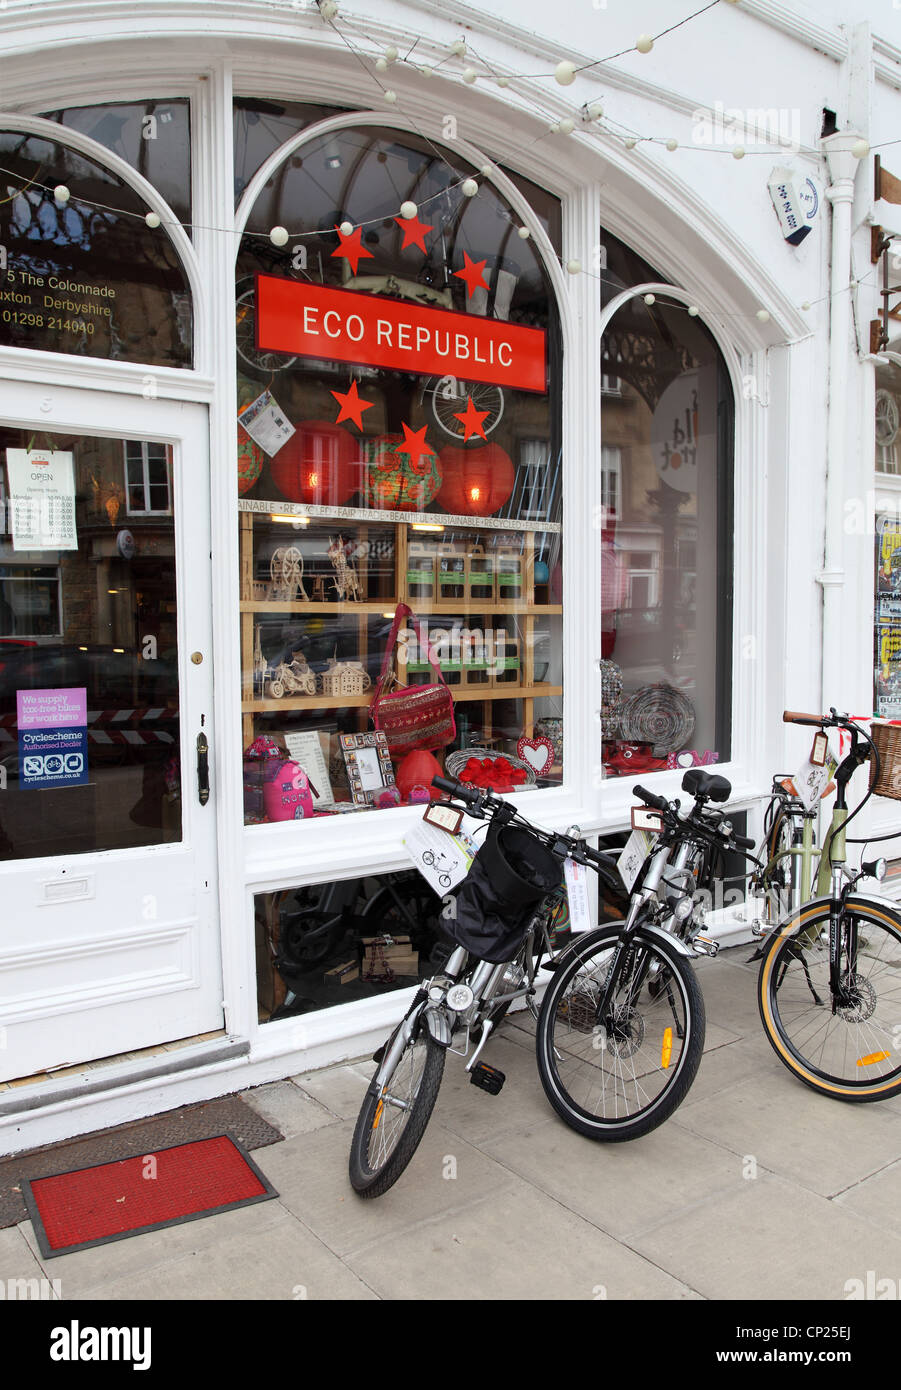 Eco Republic shop with electric bicycles for sale, Buxton, Derbyshire, England, UK Stock Photo